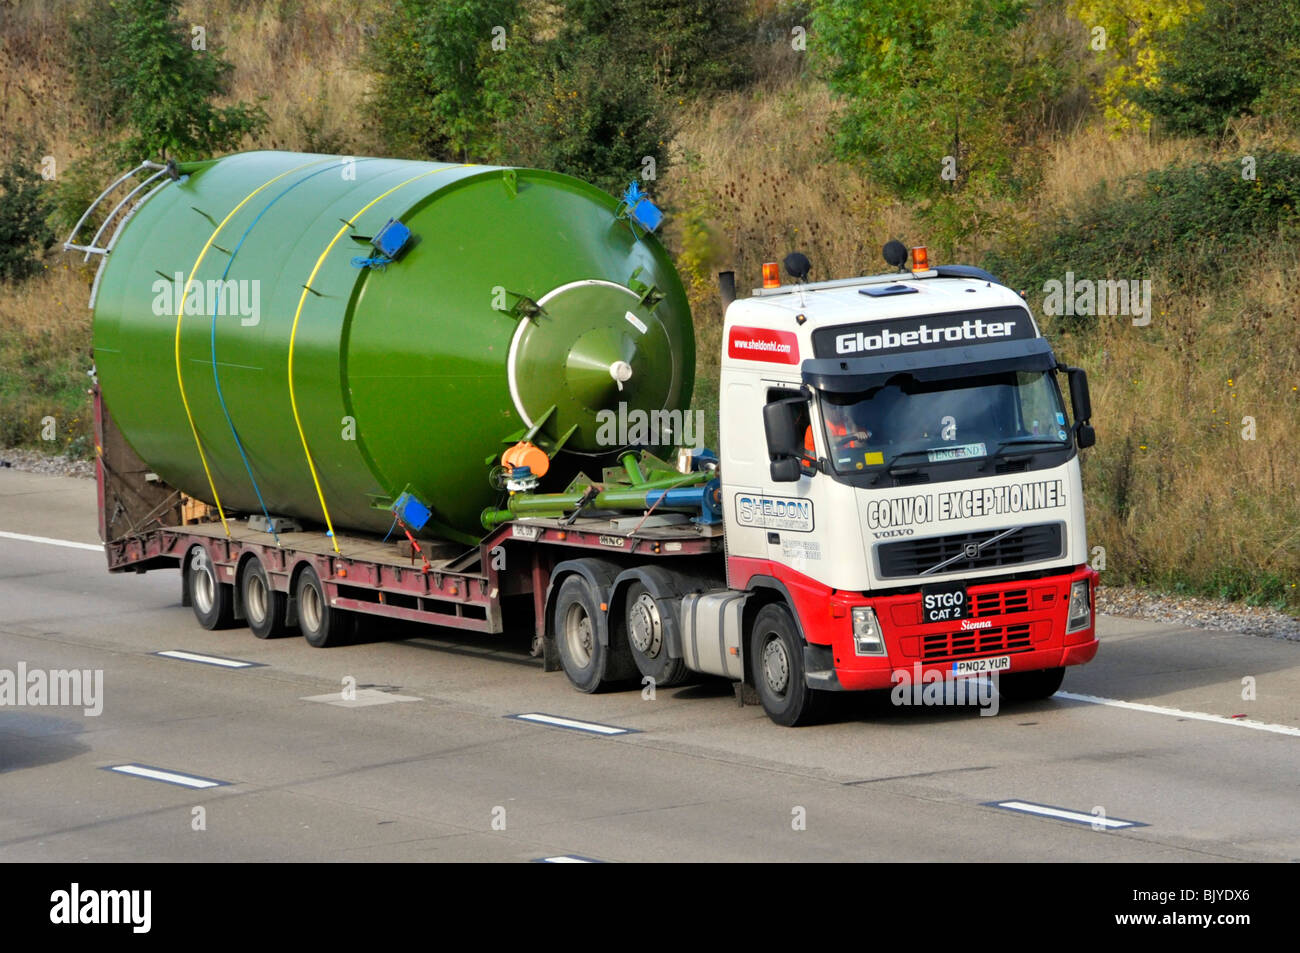 M25 motorway lorry and low loader trailer Stock Photo